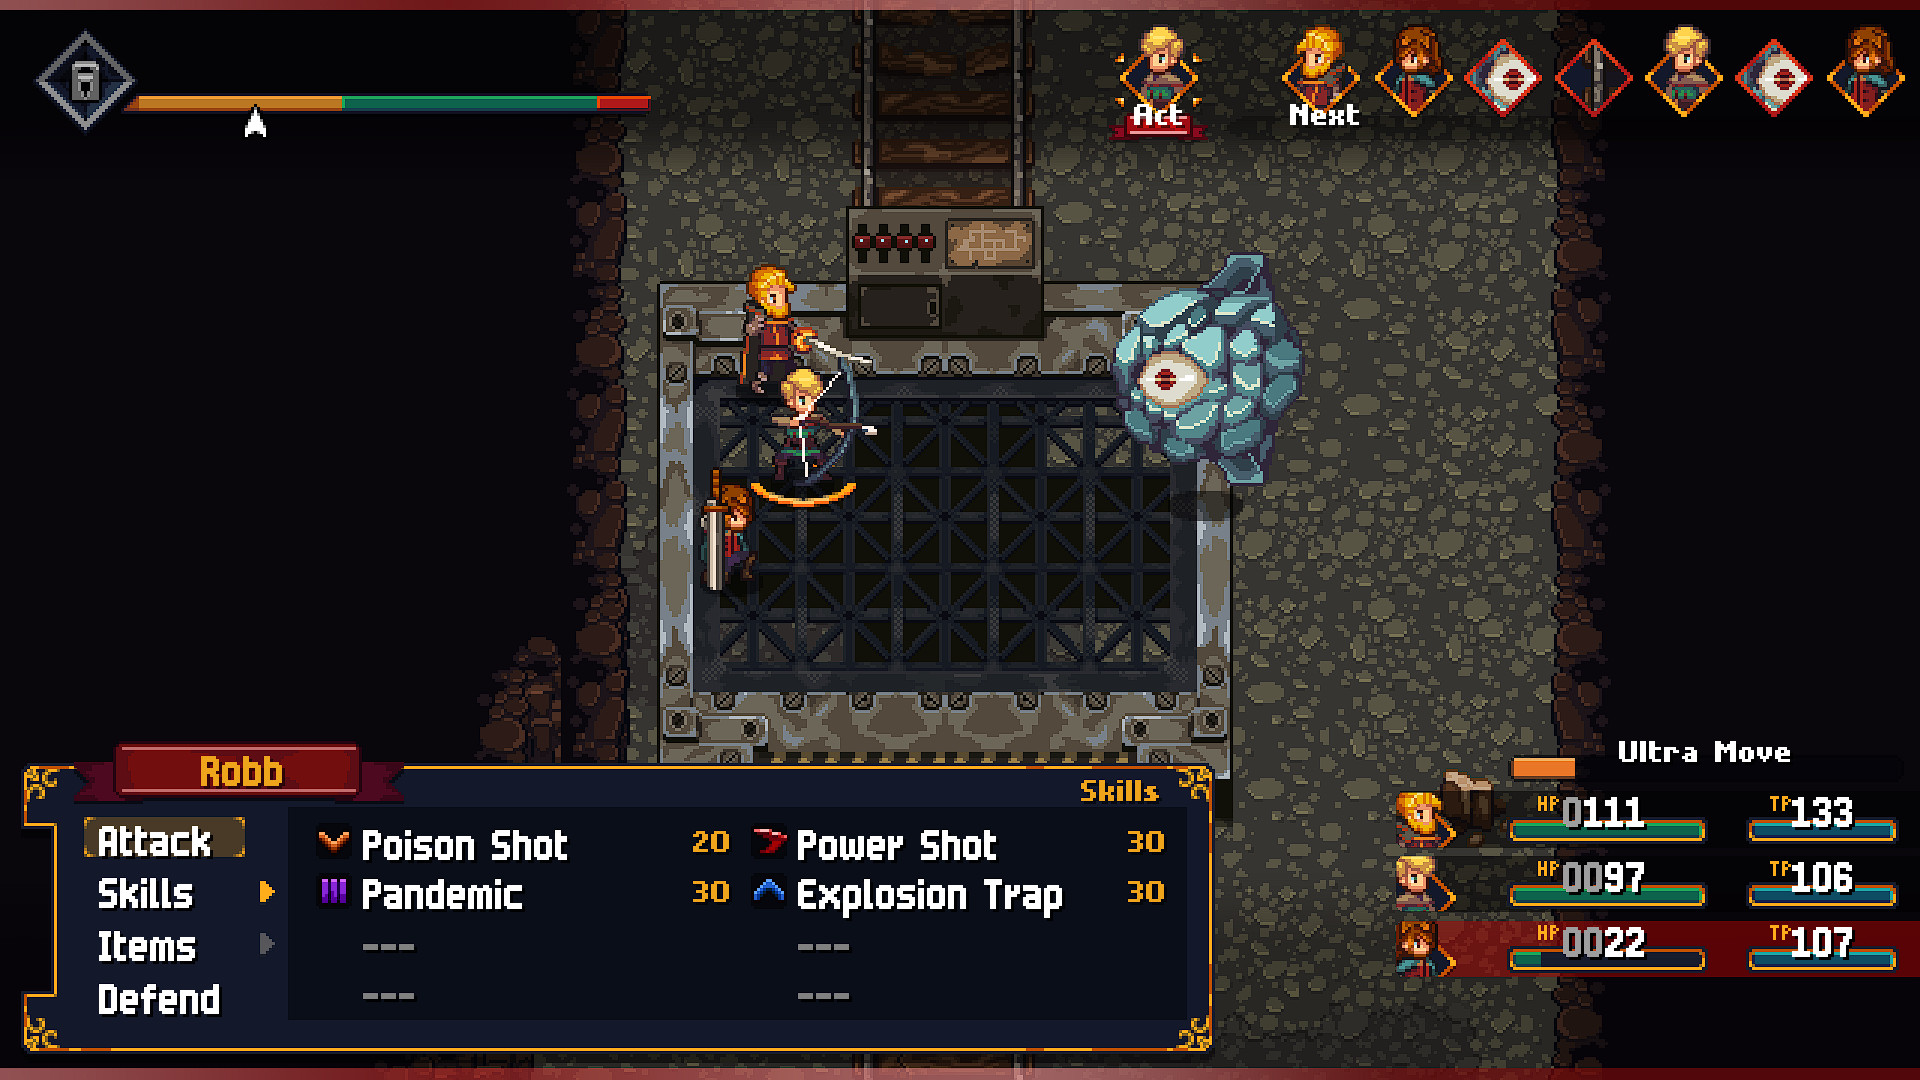 Chained Echoes 16-bit RPG launches now - Linux Gaming News